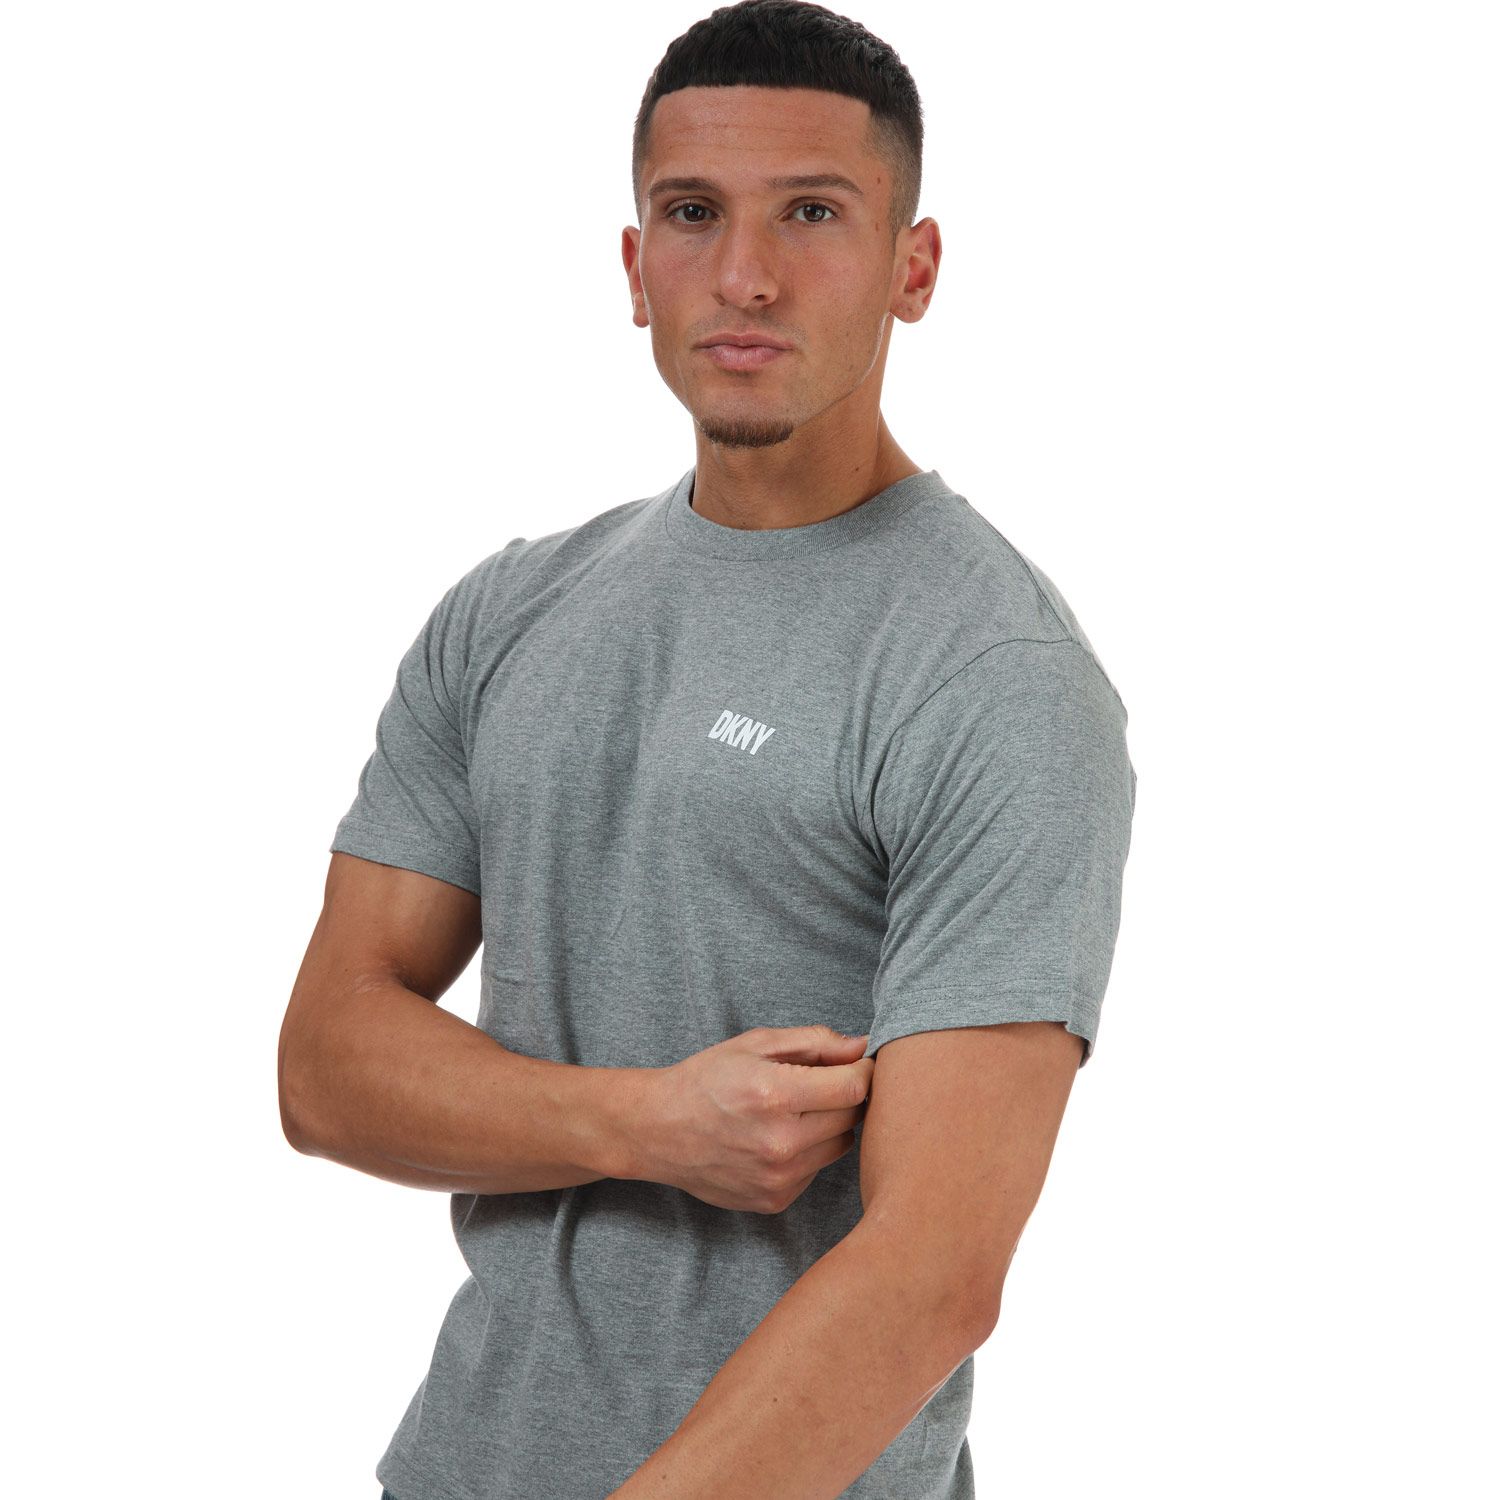 The olive T-Shirts Get DKNY 3 Lounge Pack - Mens Label Giants